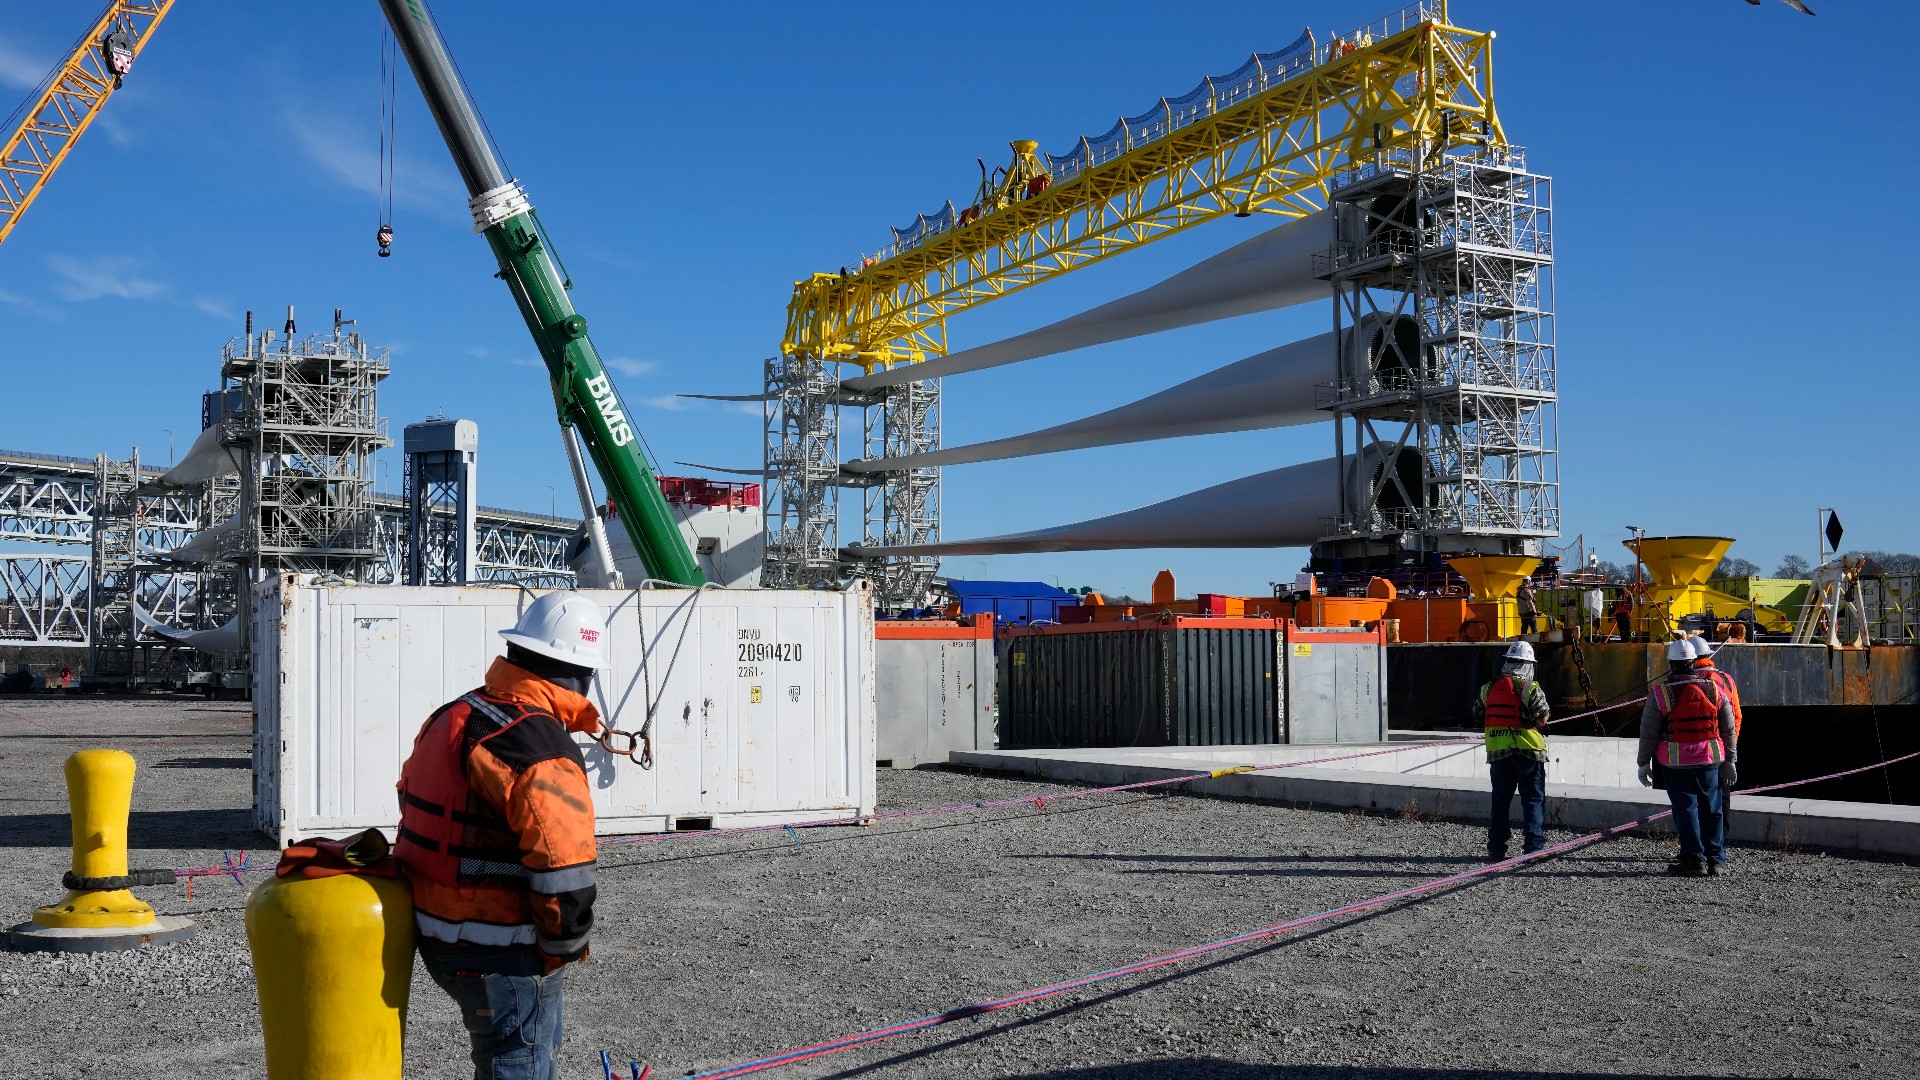 An 800-foot tall turbine has begun sending electricity onto the U.S. grid from what’s set to be the country’s first commercial offshore wind farm.